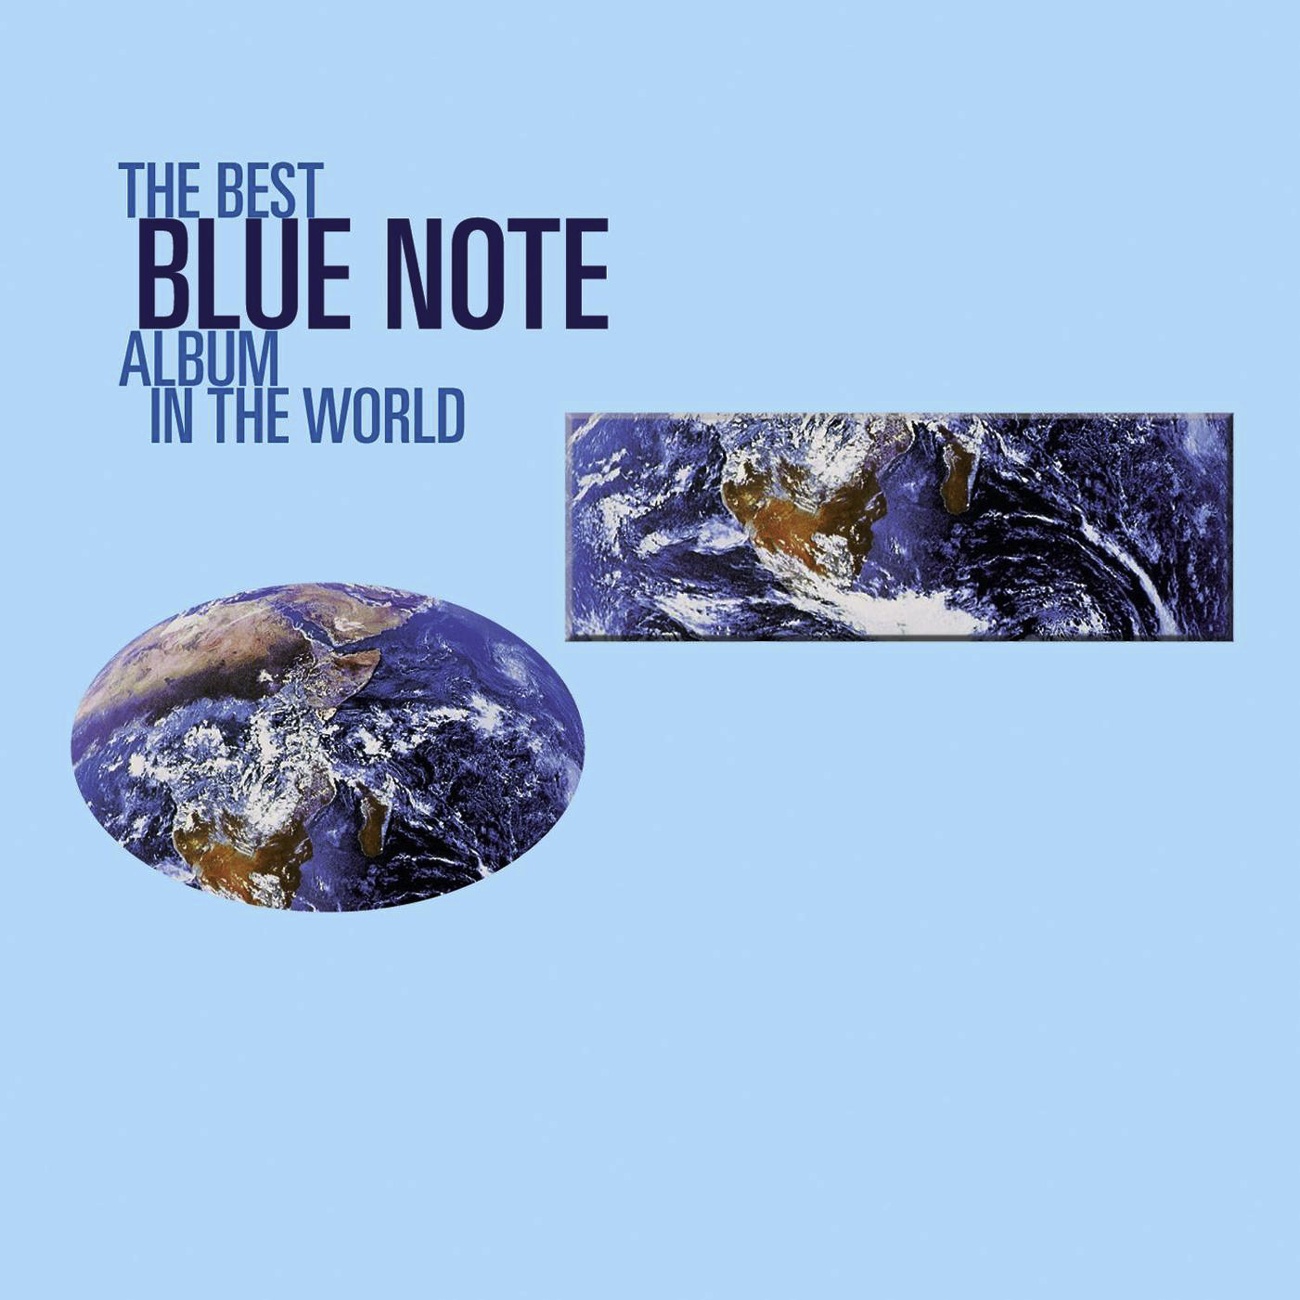 The Best Blue Note Album In The World